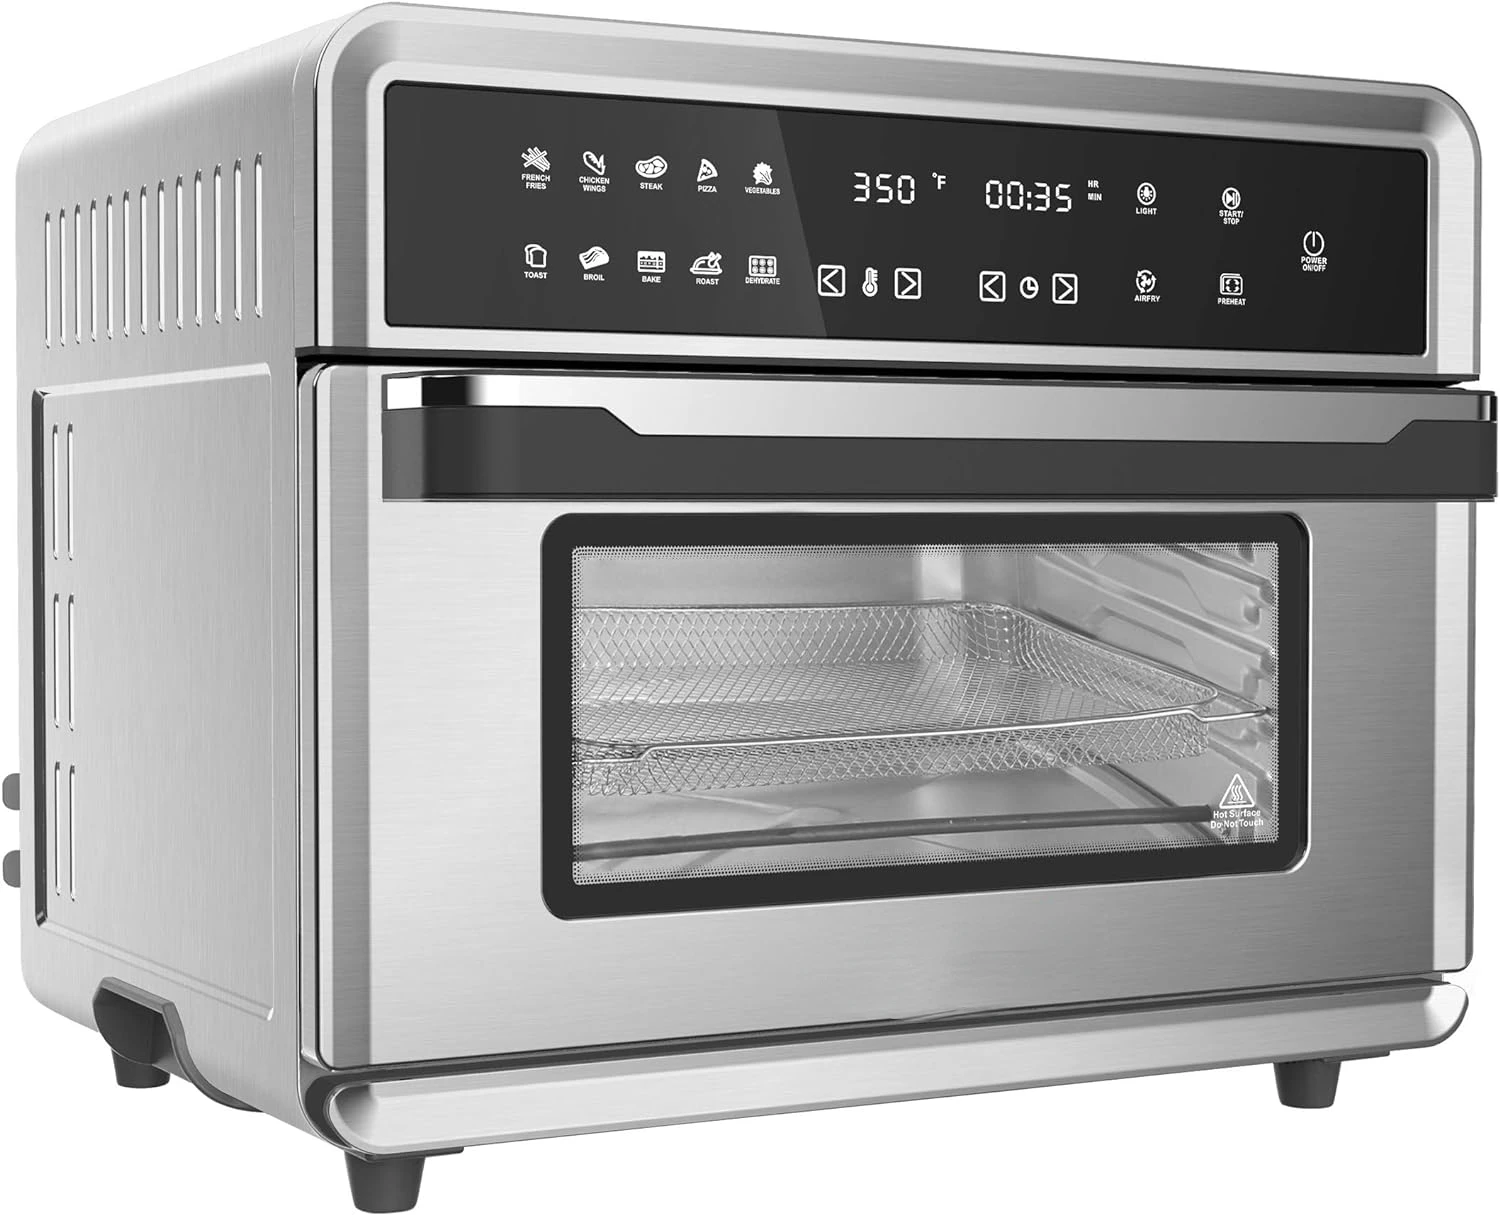 

in 1 Electronic Multifunction 360 Degree Hot Air Technology Countertop Oven, Silver Chrome, 25 Liter Capacity